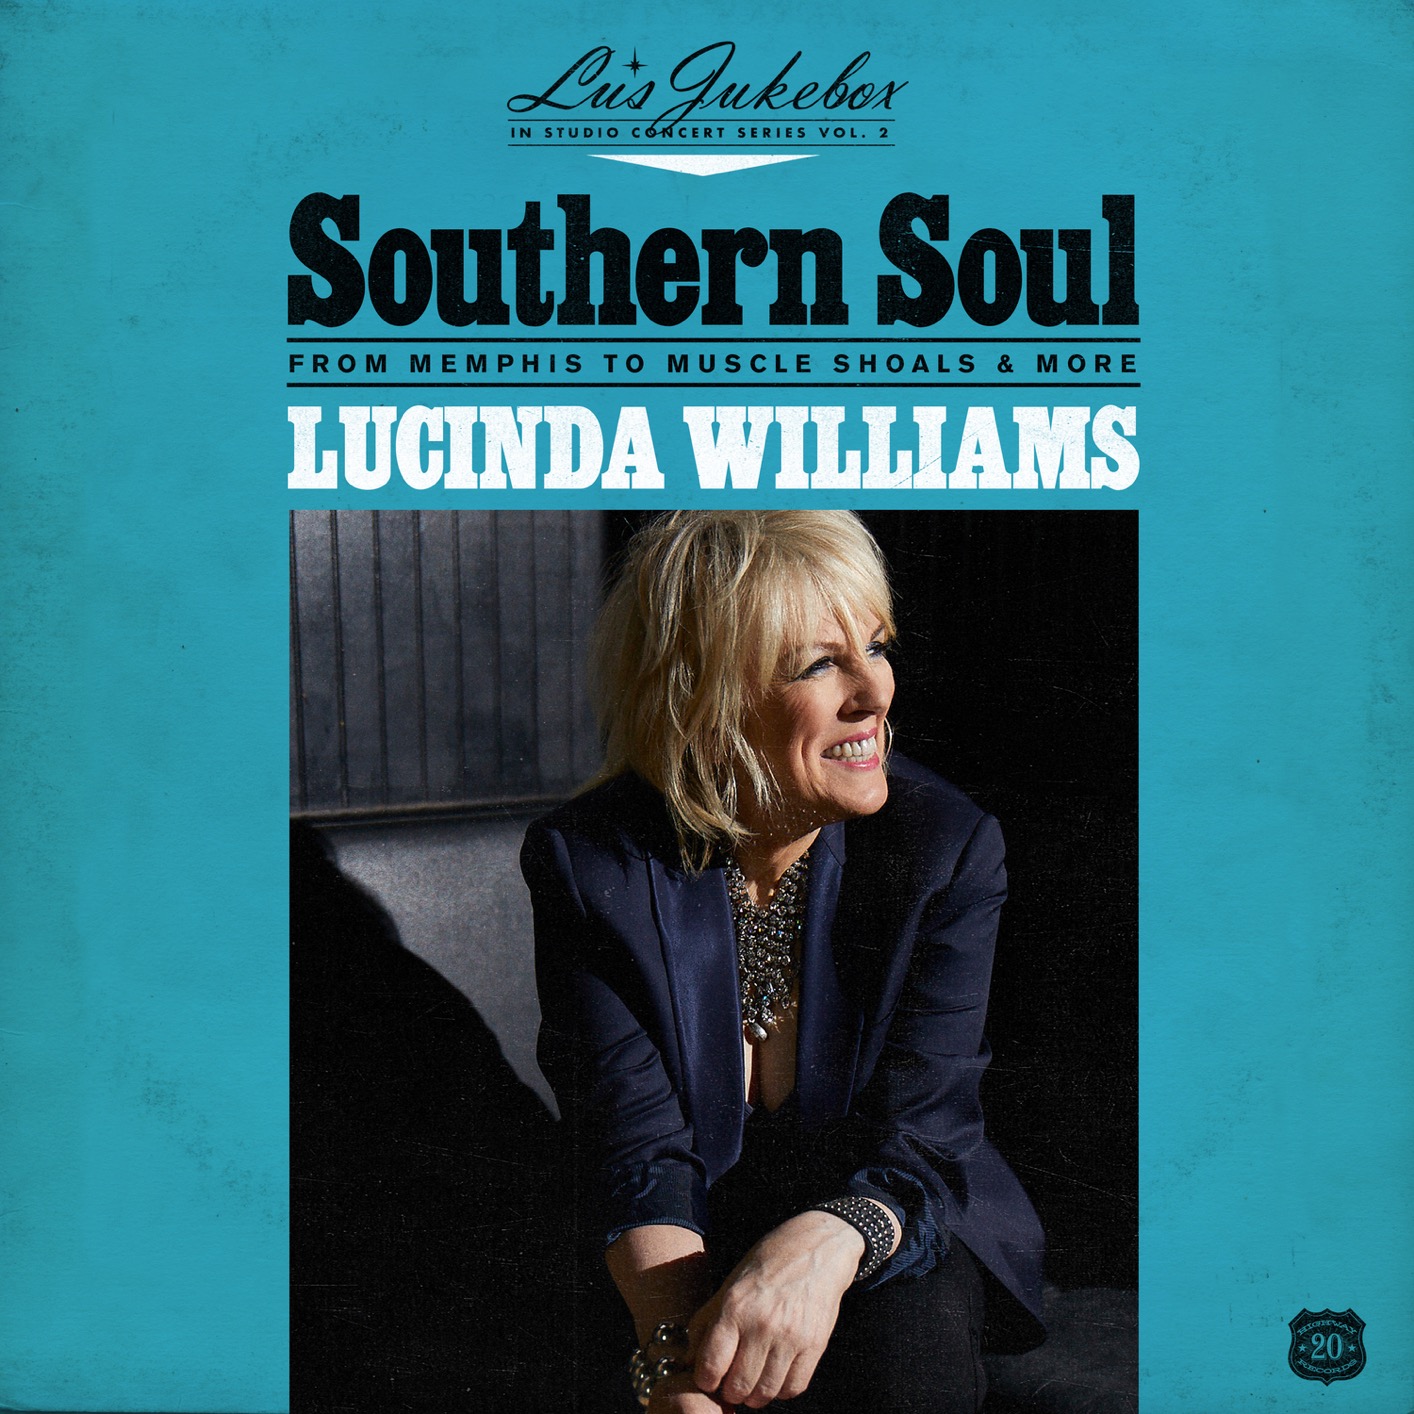 Lucinda Williams – Southern Soul: From Memphis to Muscle Shoals & More (2020) [FLAC 24bit/48kHz]